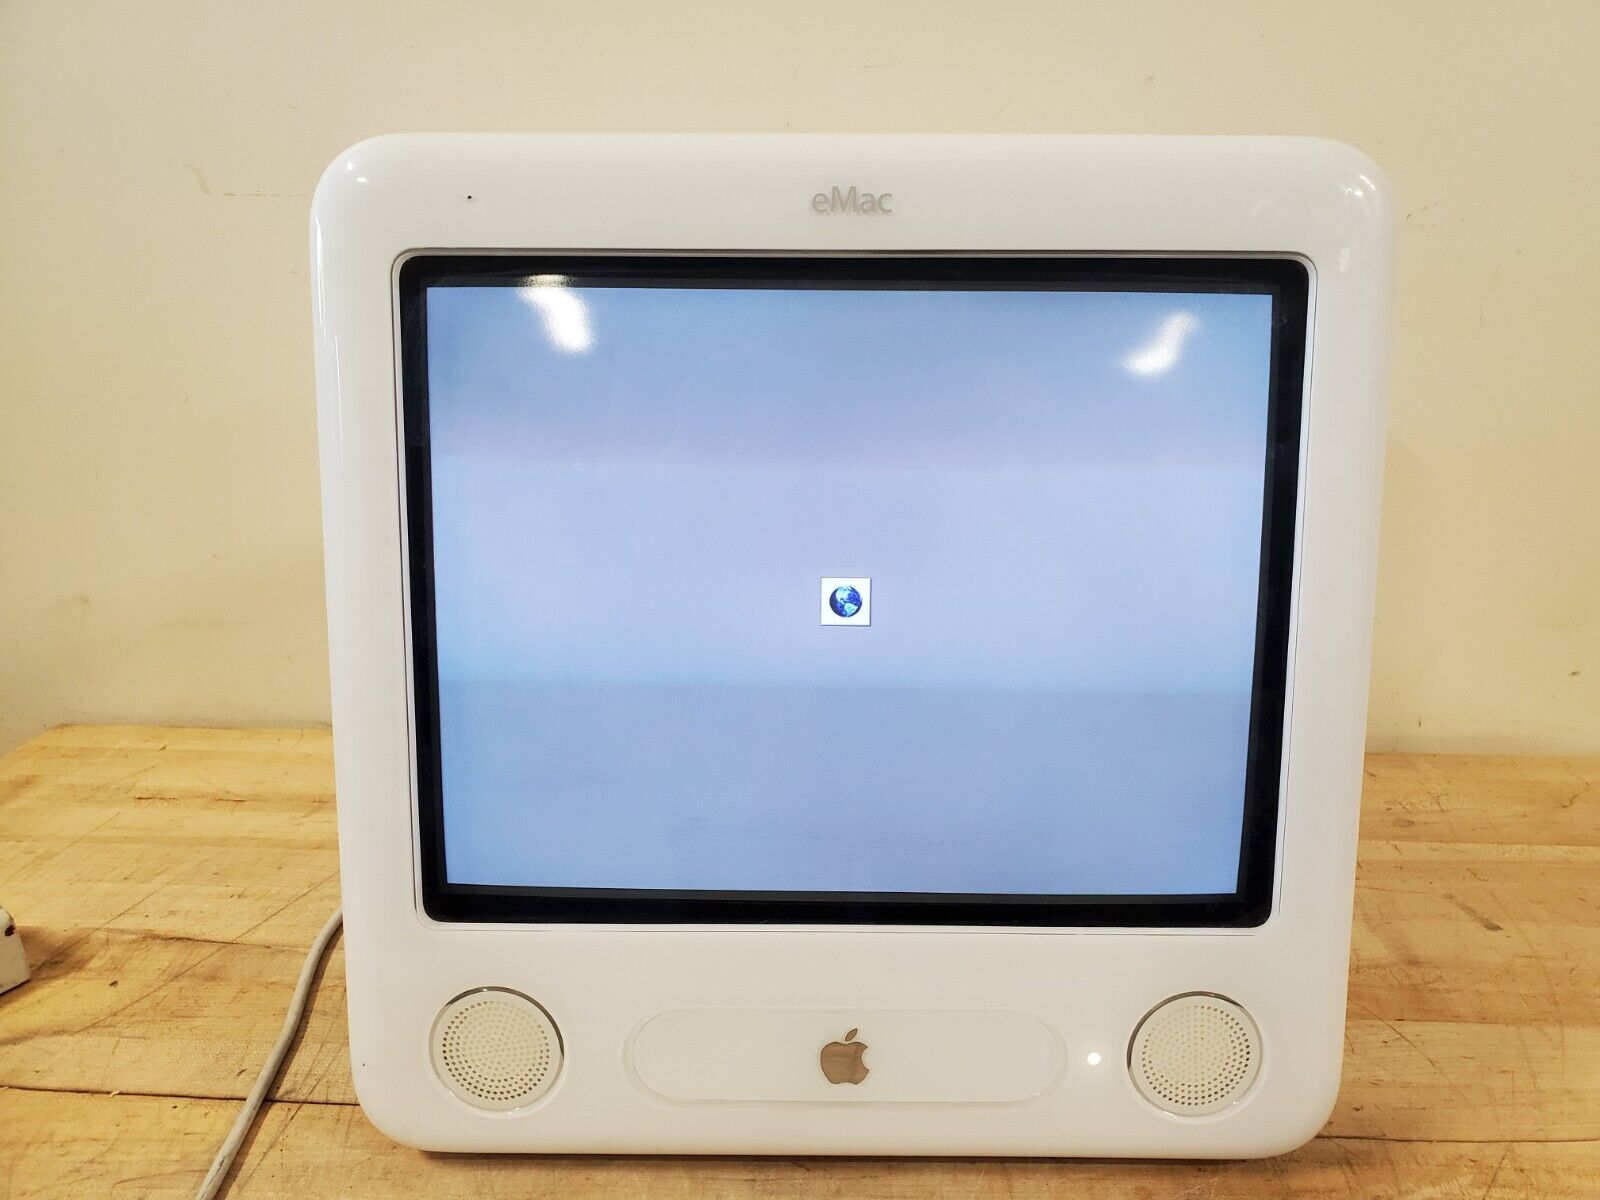 Apple eMac A1002 G4 - Turns On